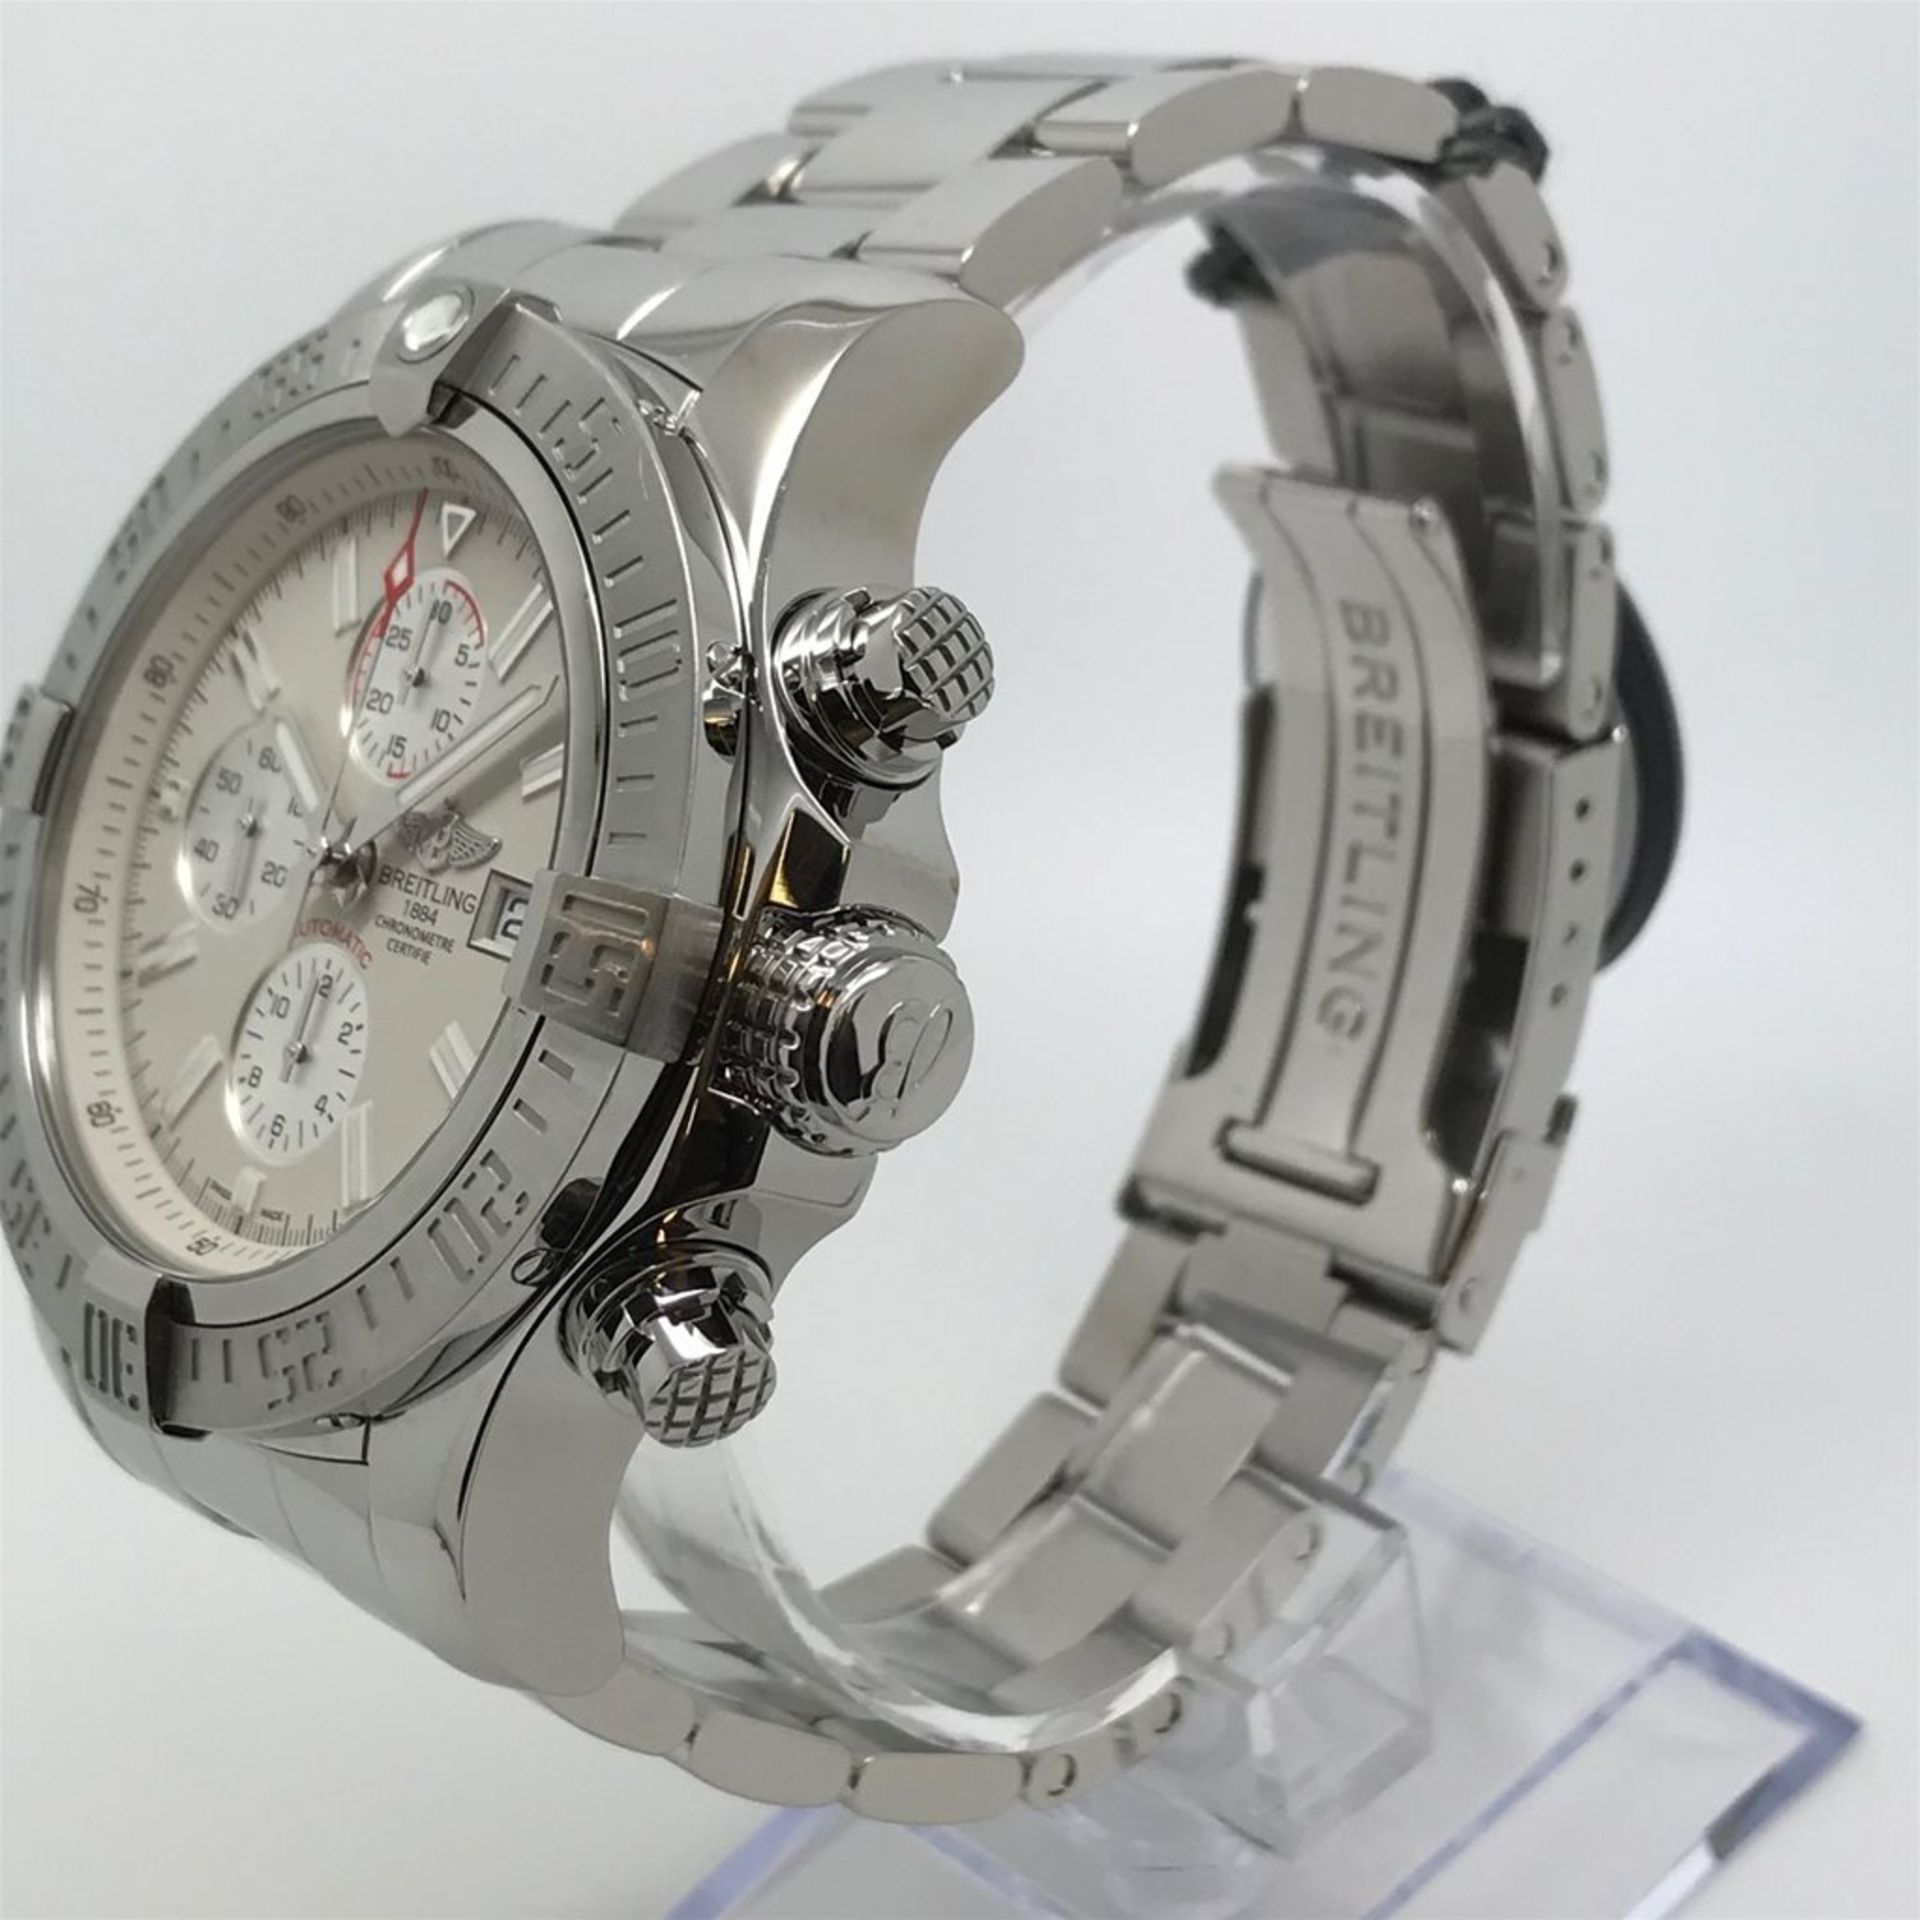 BREITLING Super Avenger II A13371, 2015 - Box & Papers - Image 2 of 5